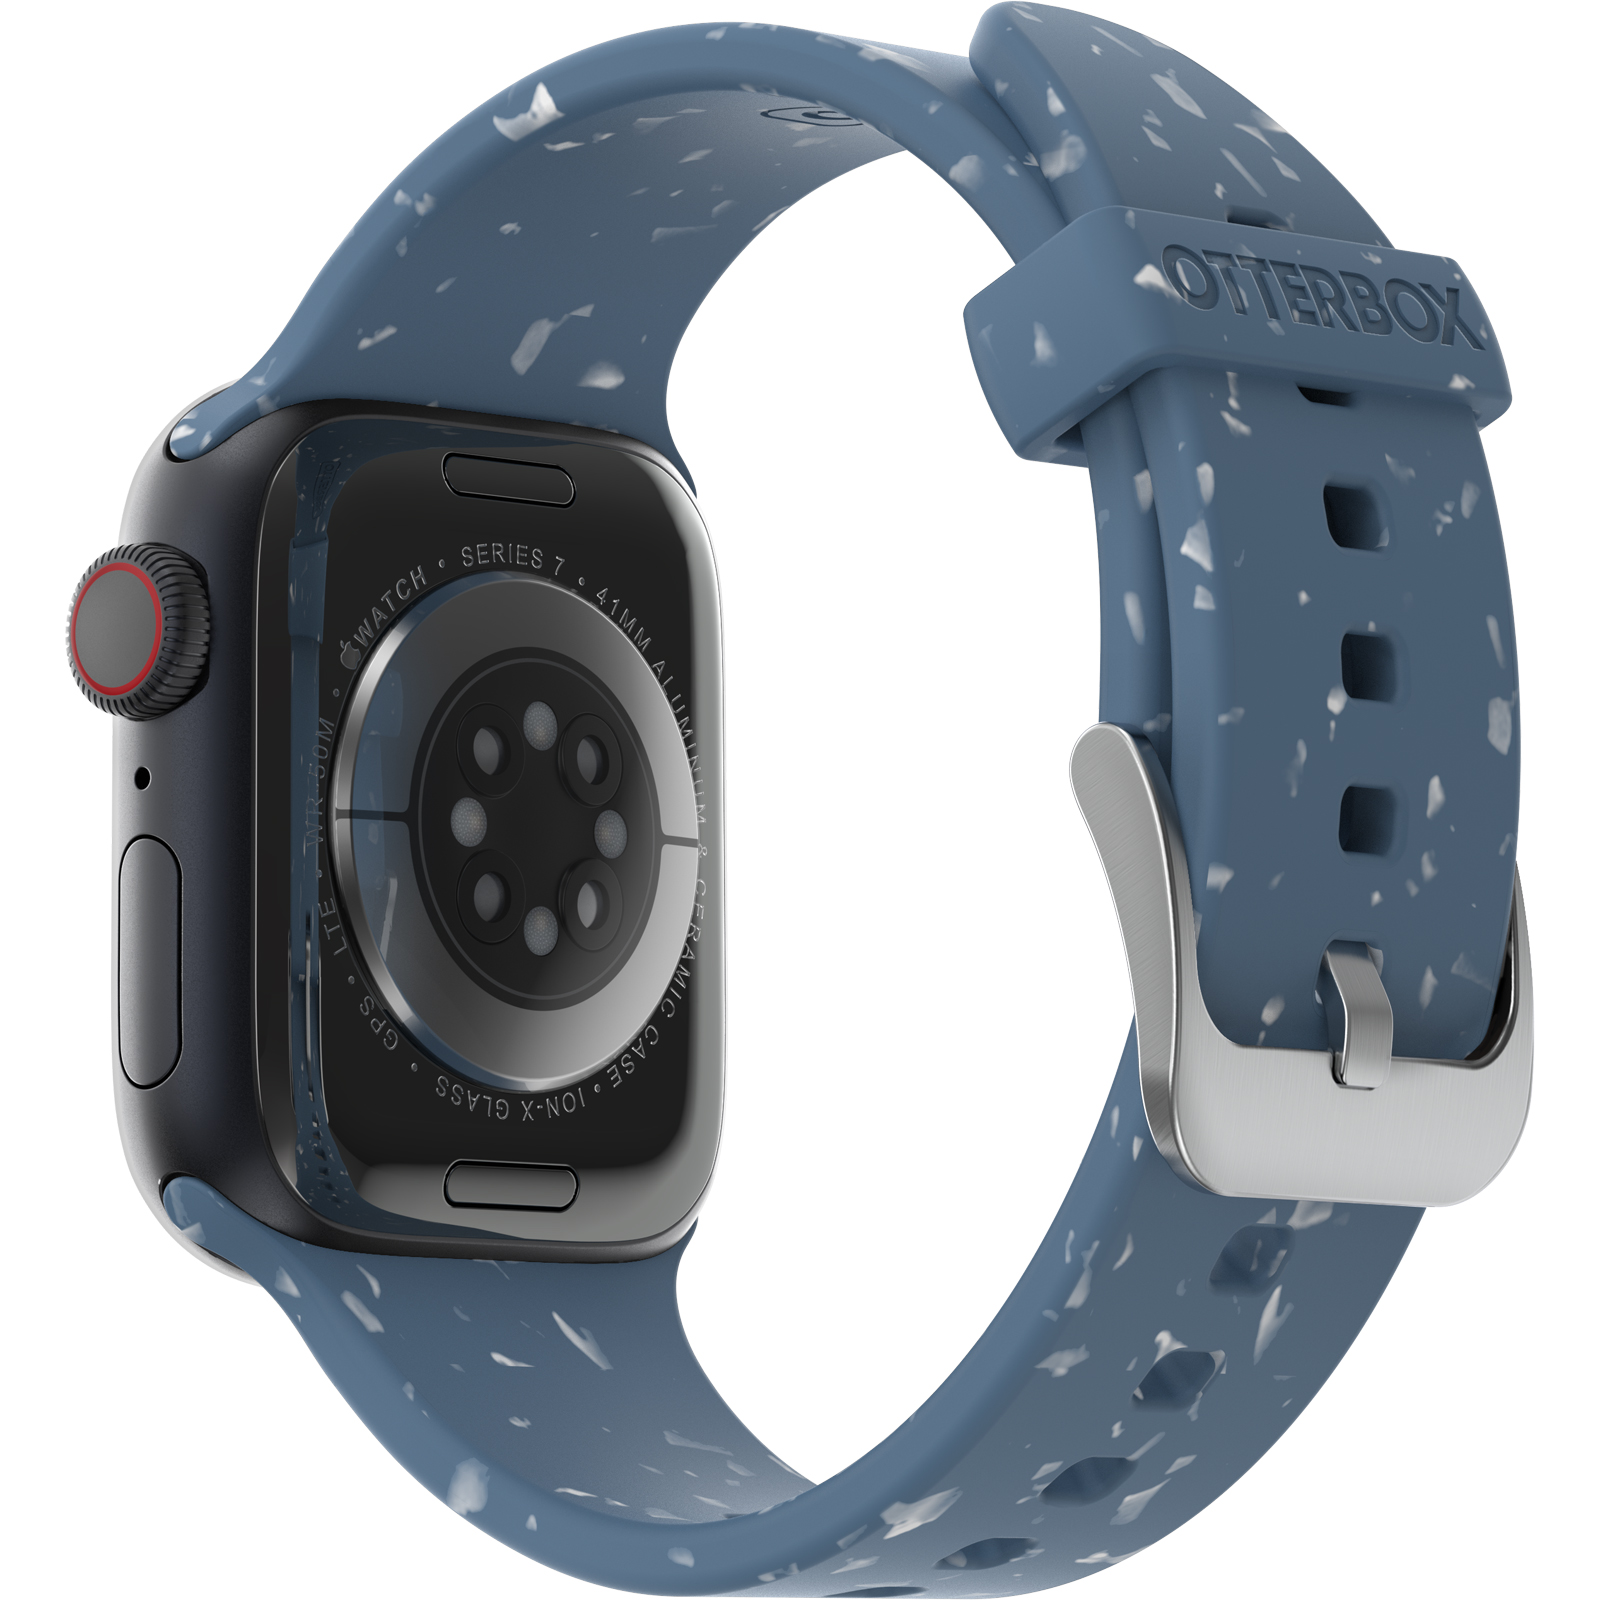 Blue Apple Watch wristband that leaves landfill the less for